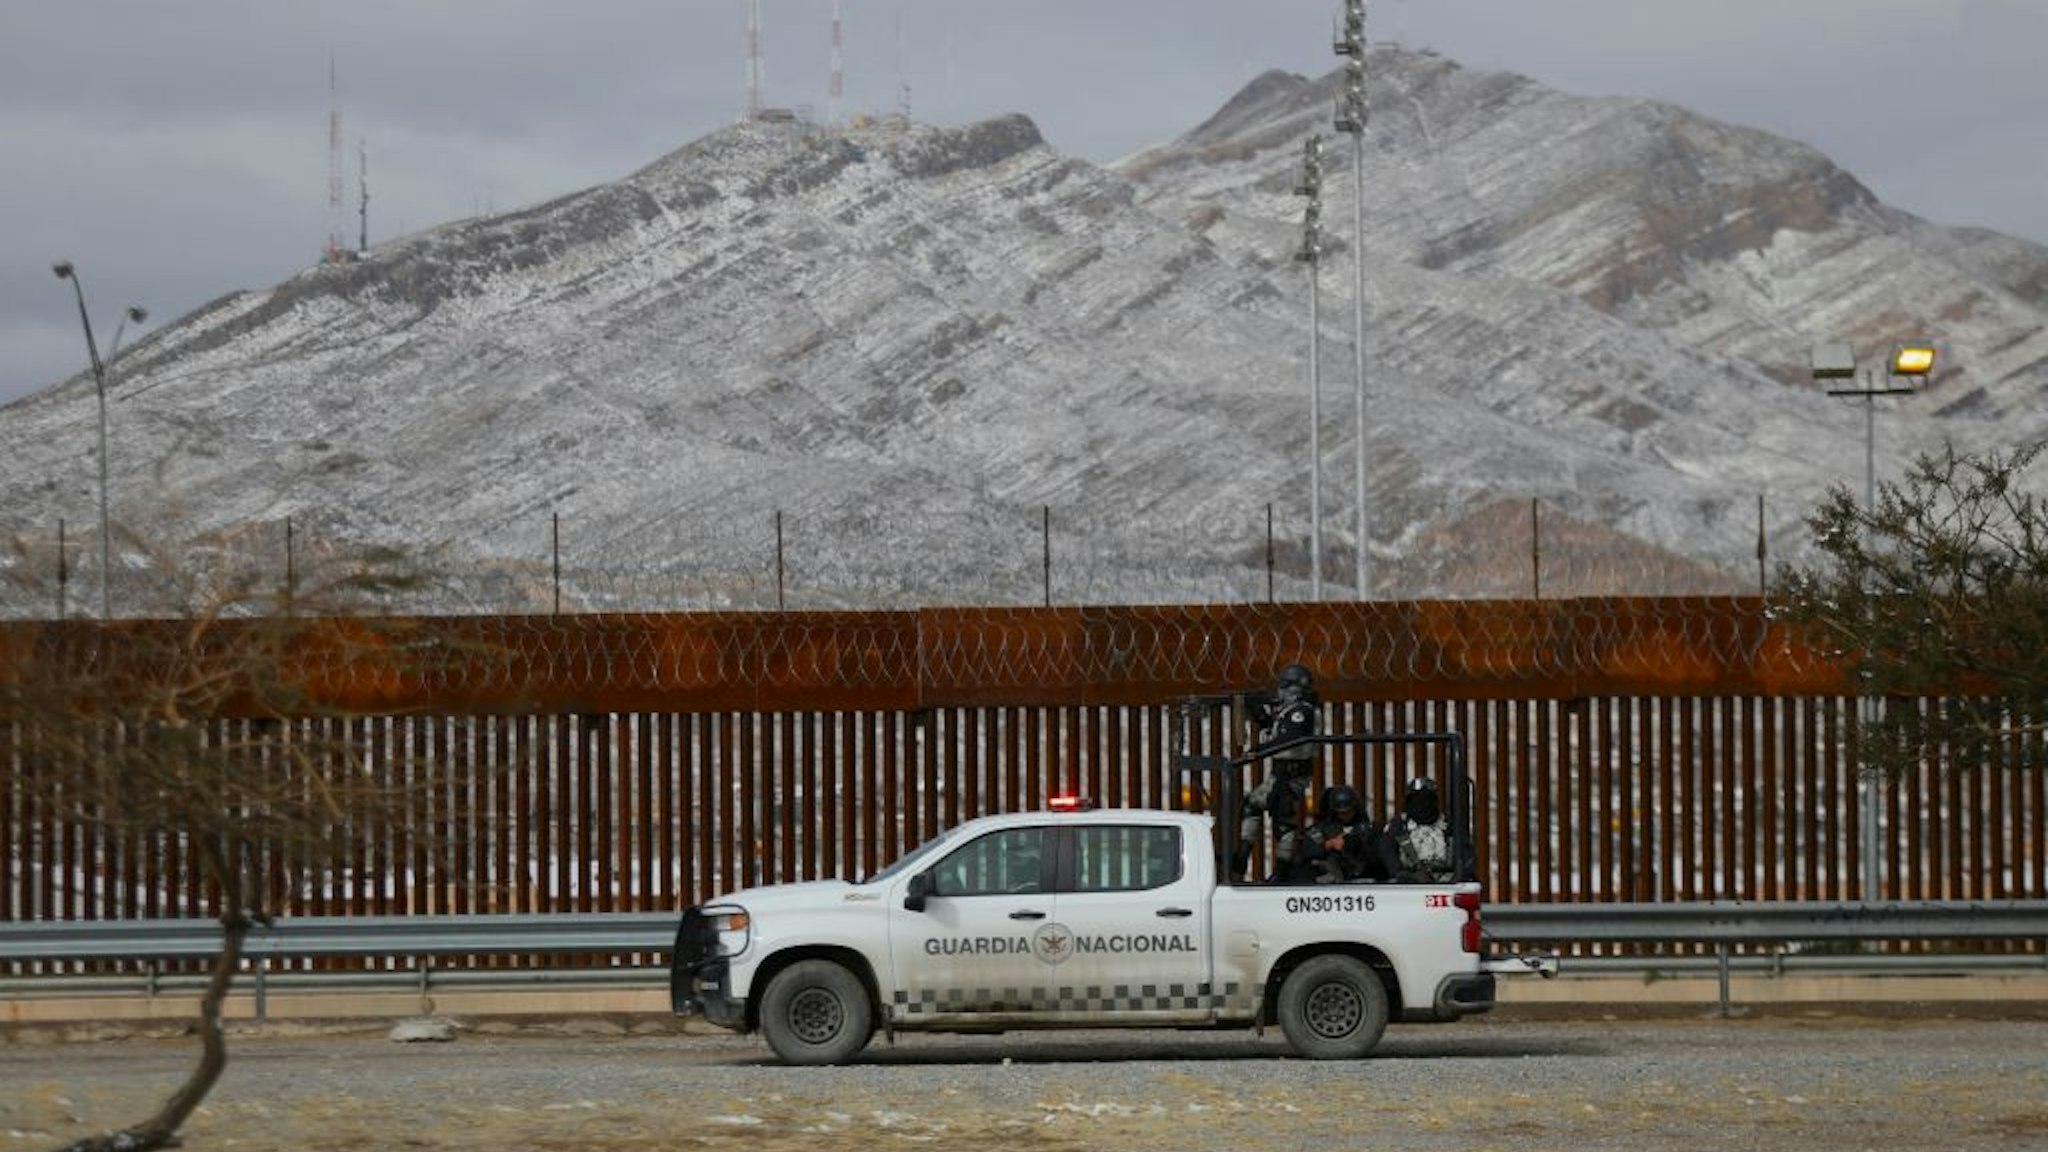 National Guard agents patrol the border wall to prevent migrants from crossing into the United States, after a winter storm in Ciudad Juarez, Chihuahua state, Mexico on February 3, 2022.